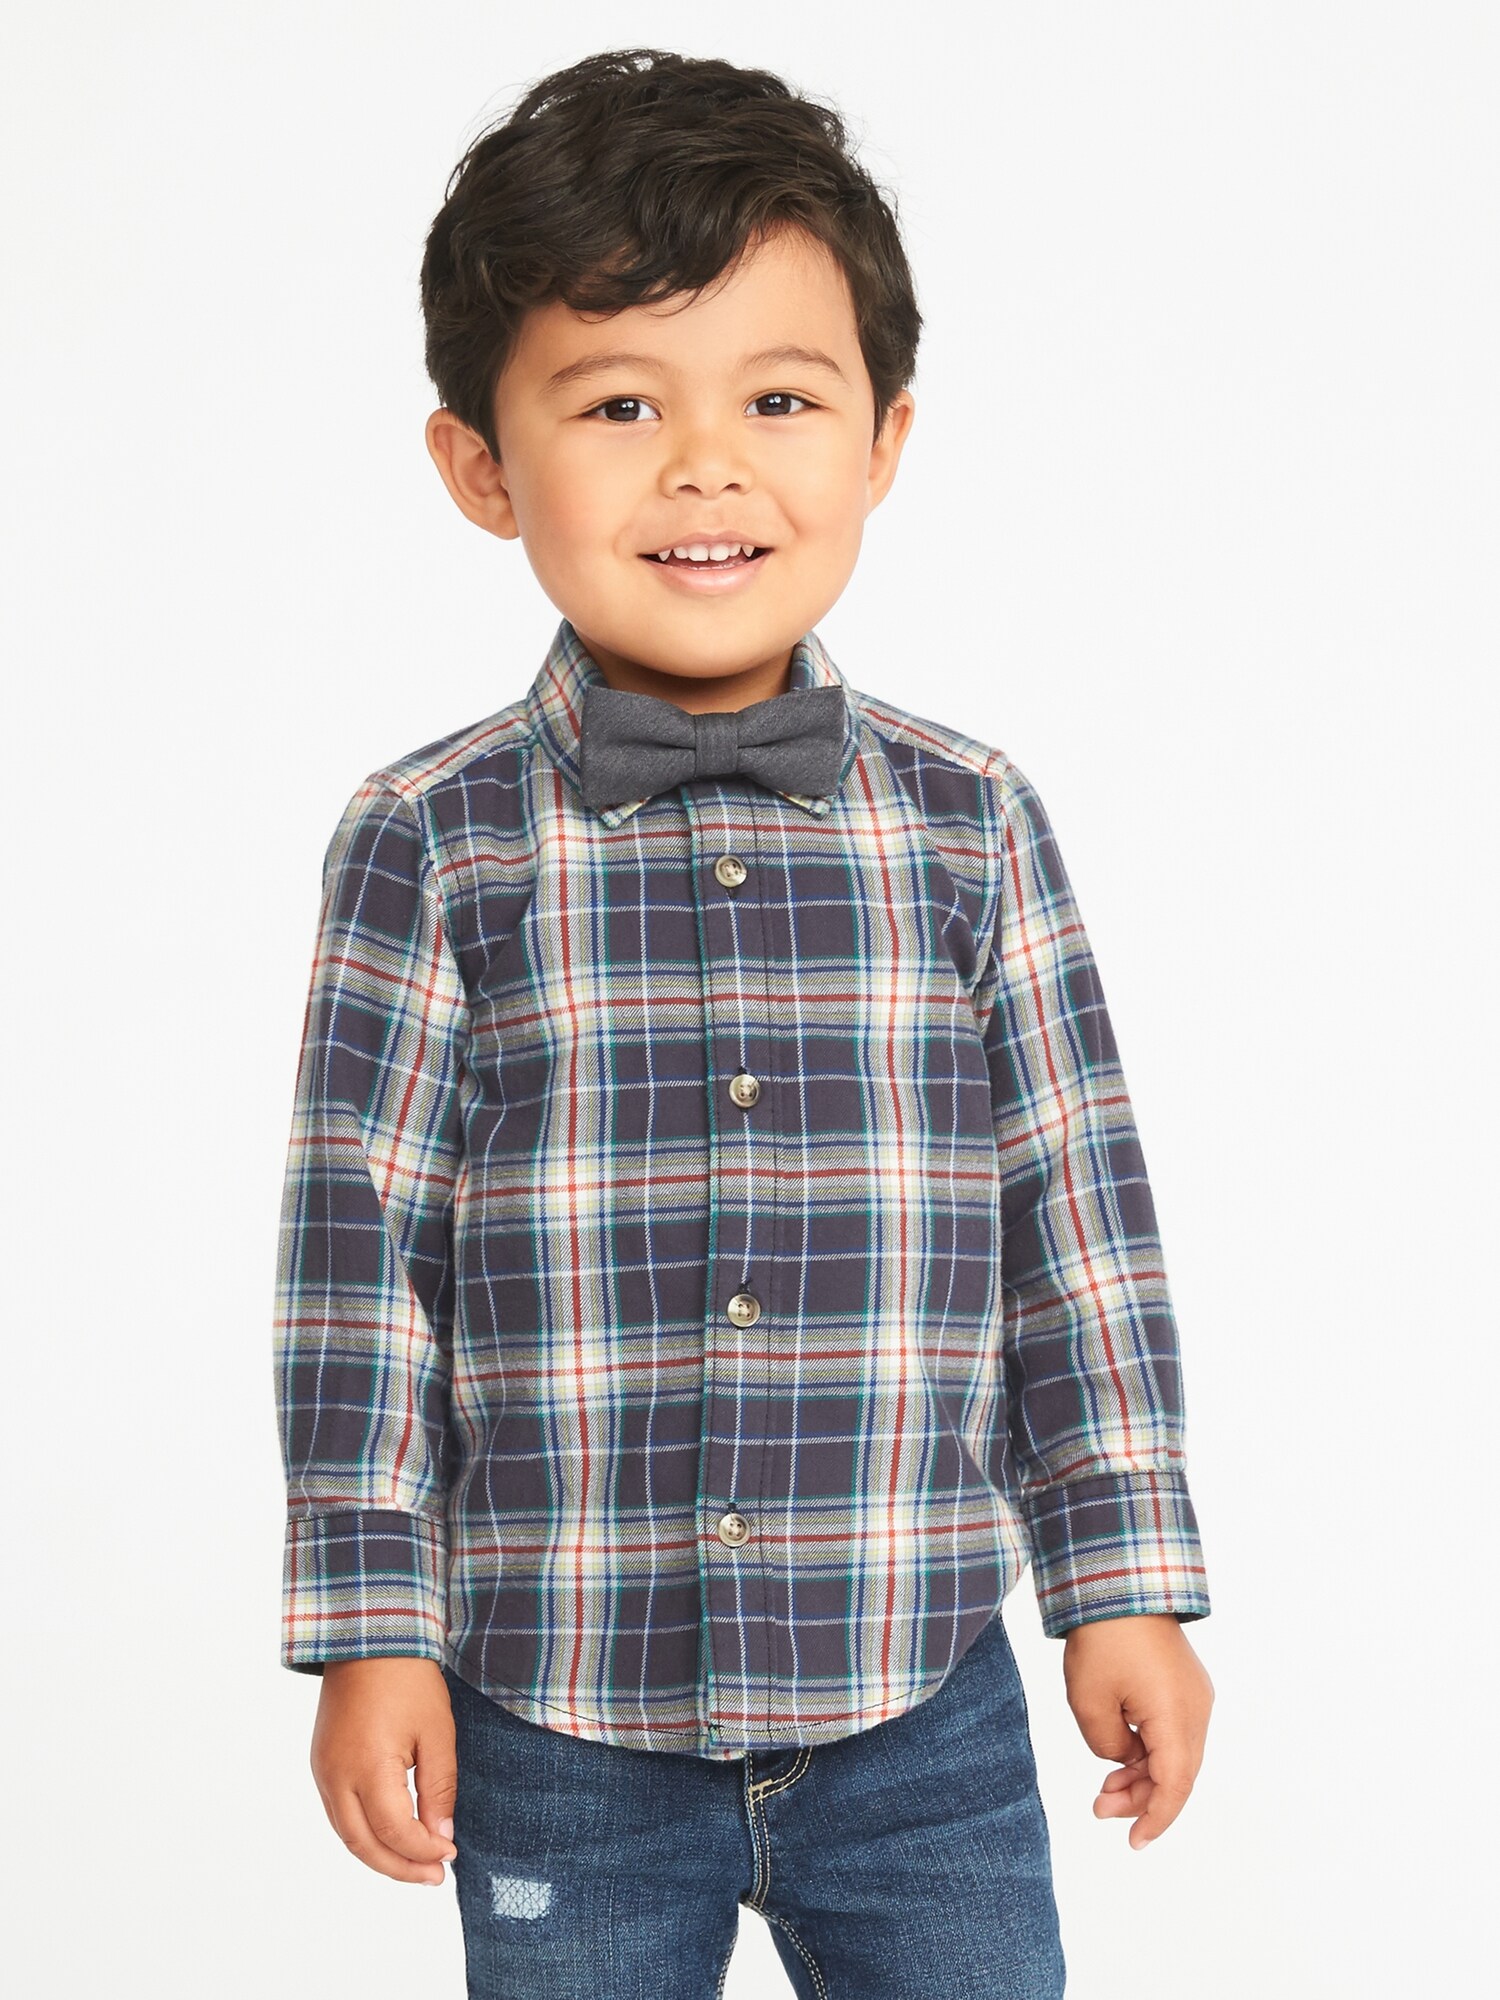 Shirt & Bow-Tie Set for Toddler Boys | Old Navy